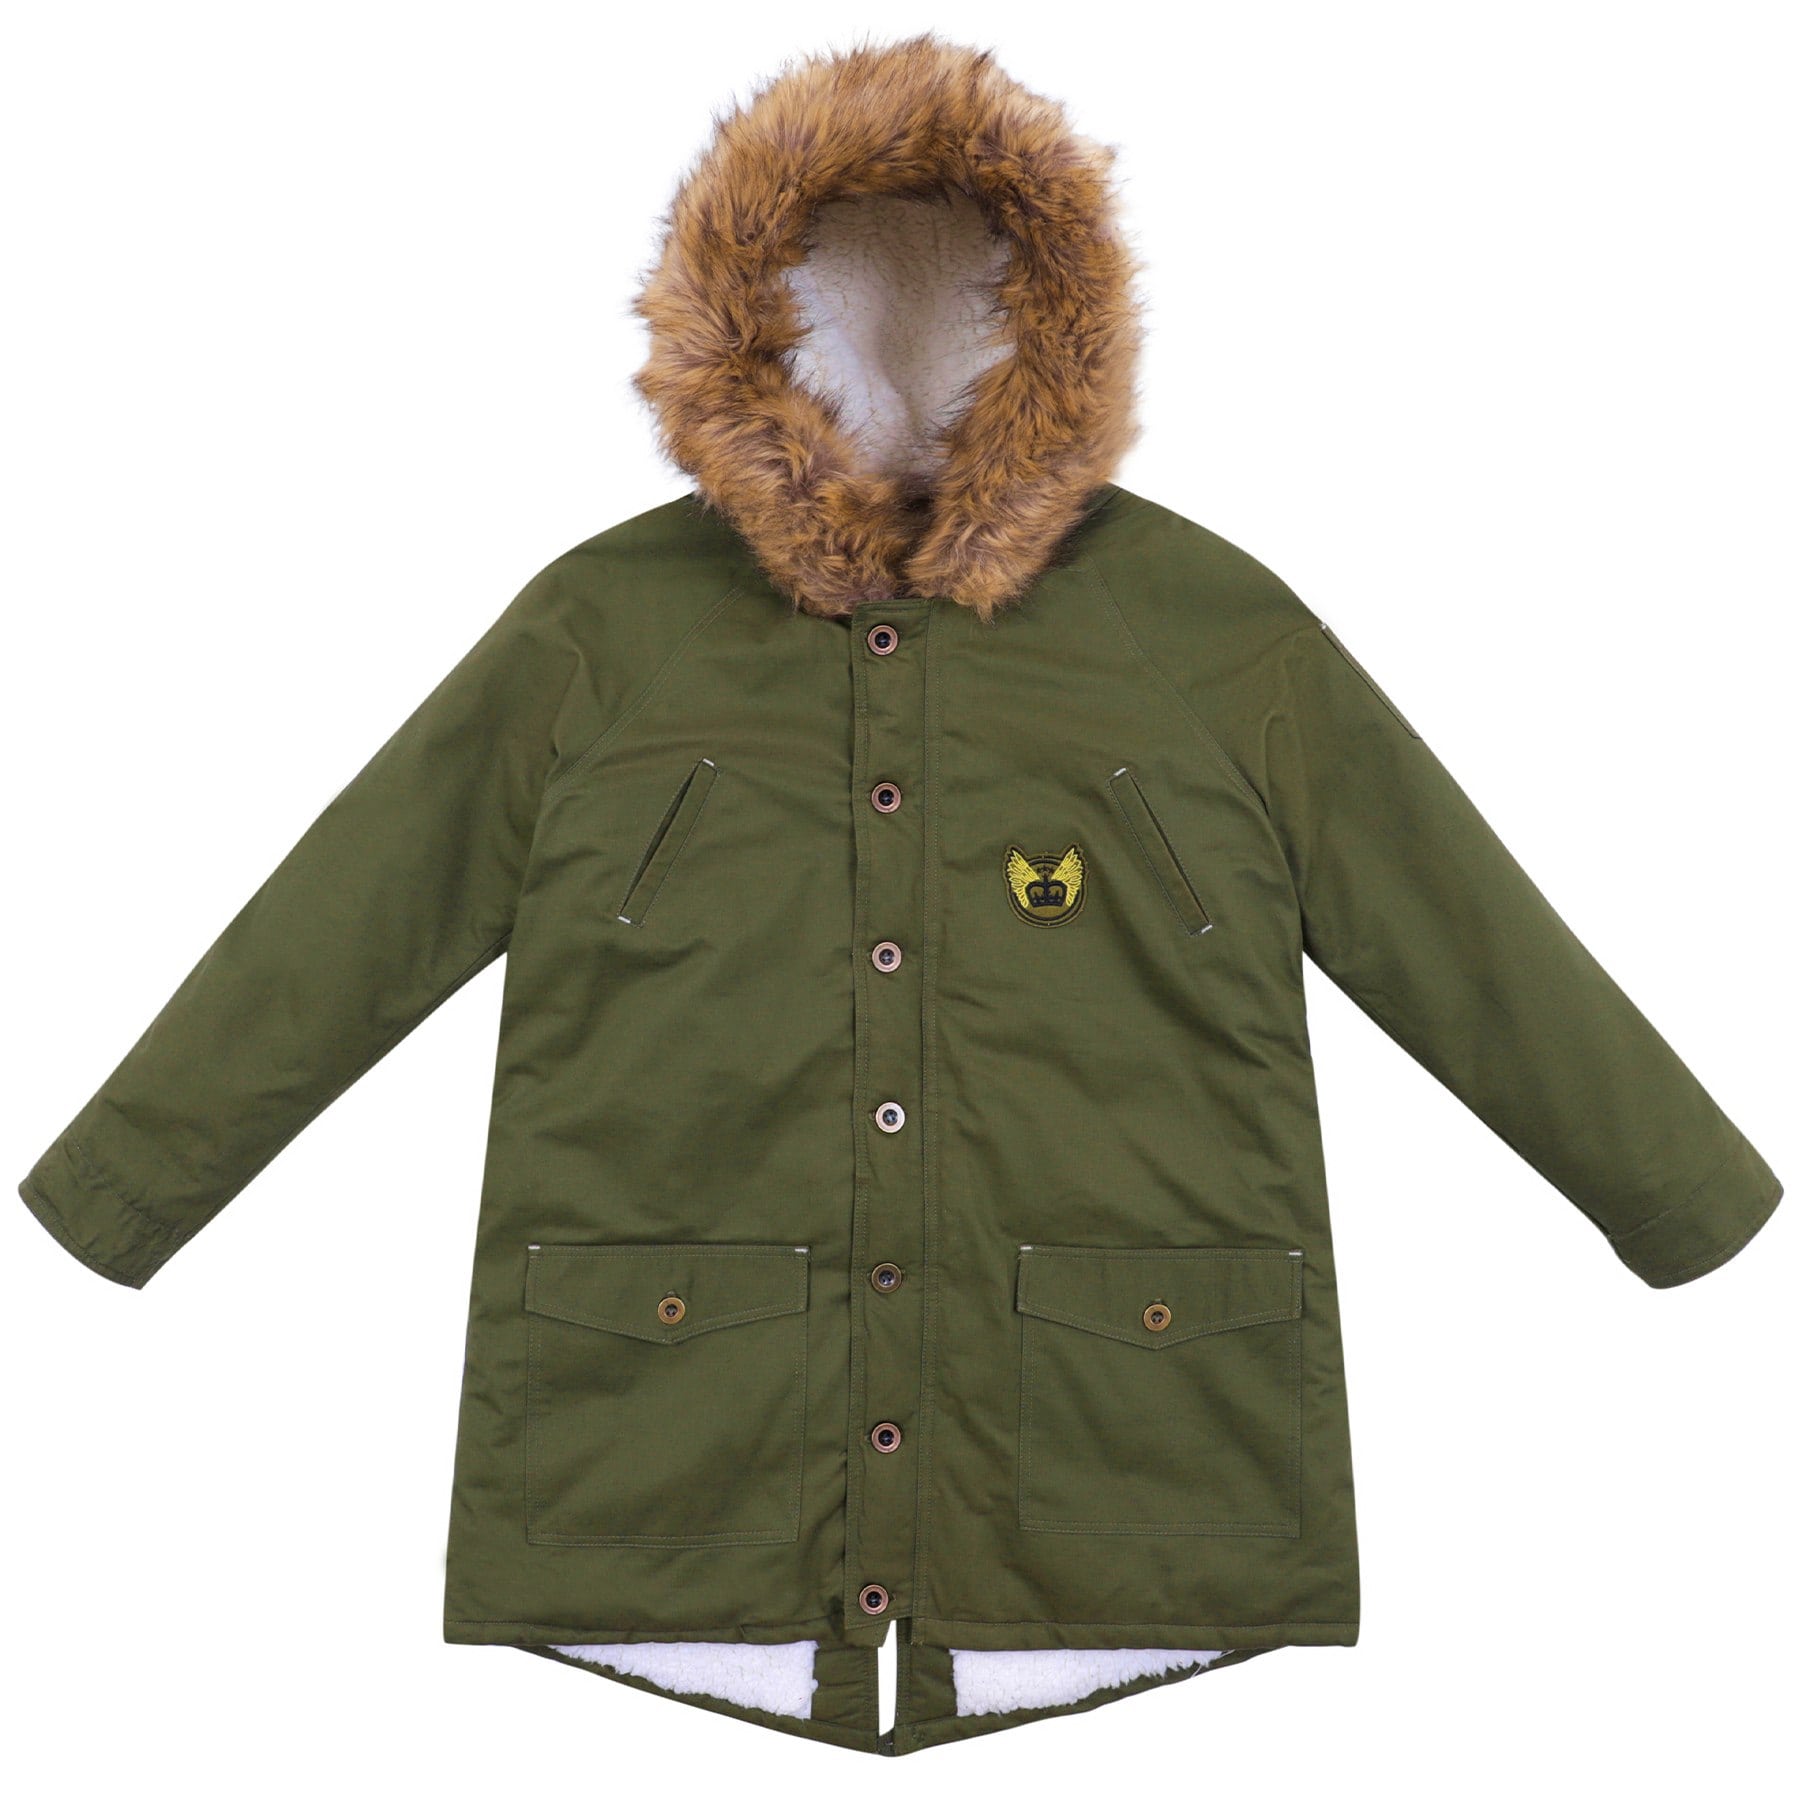 oversized parka for women and men khaki with crest and big hood in fake fur